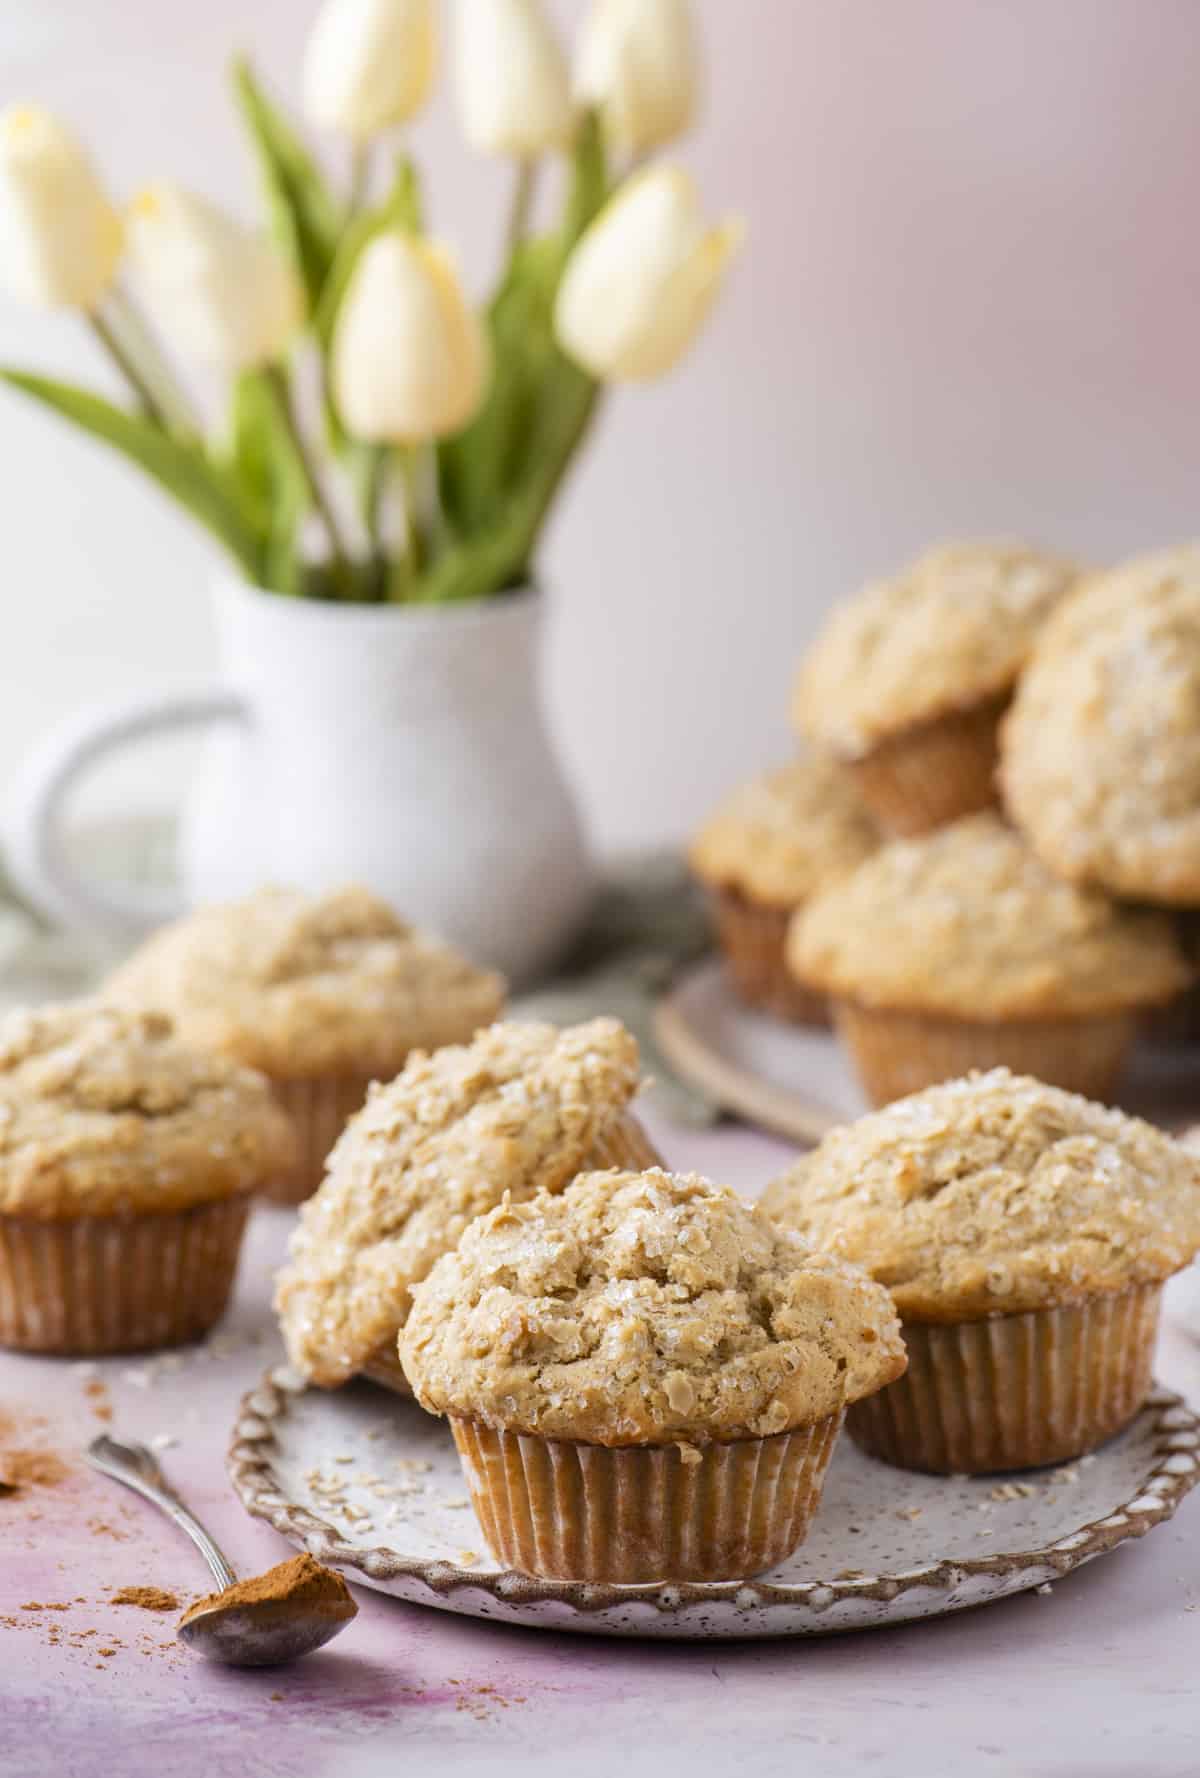 three oatmeal muffins on a light grey plate with a spoon of cinnamon beside it and more muffins and a vase of tulips in the background